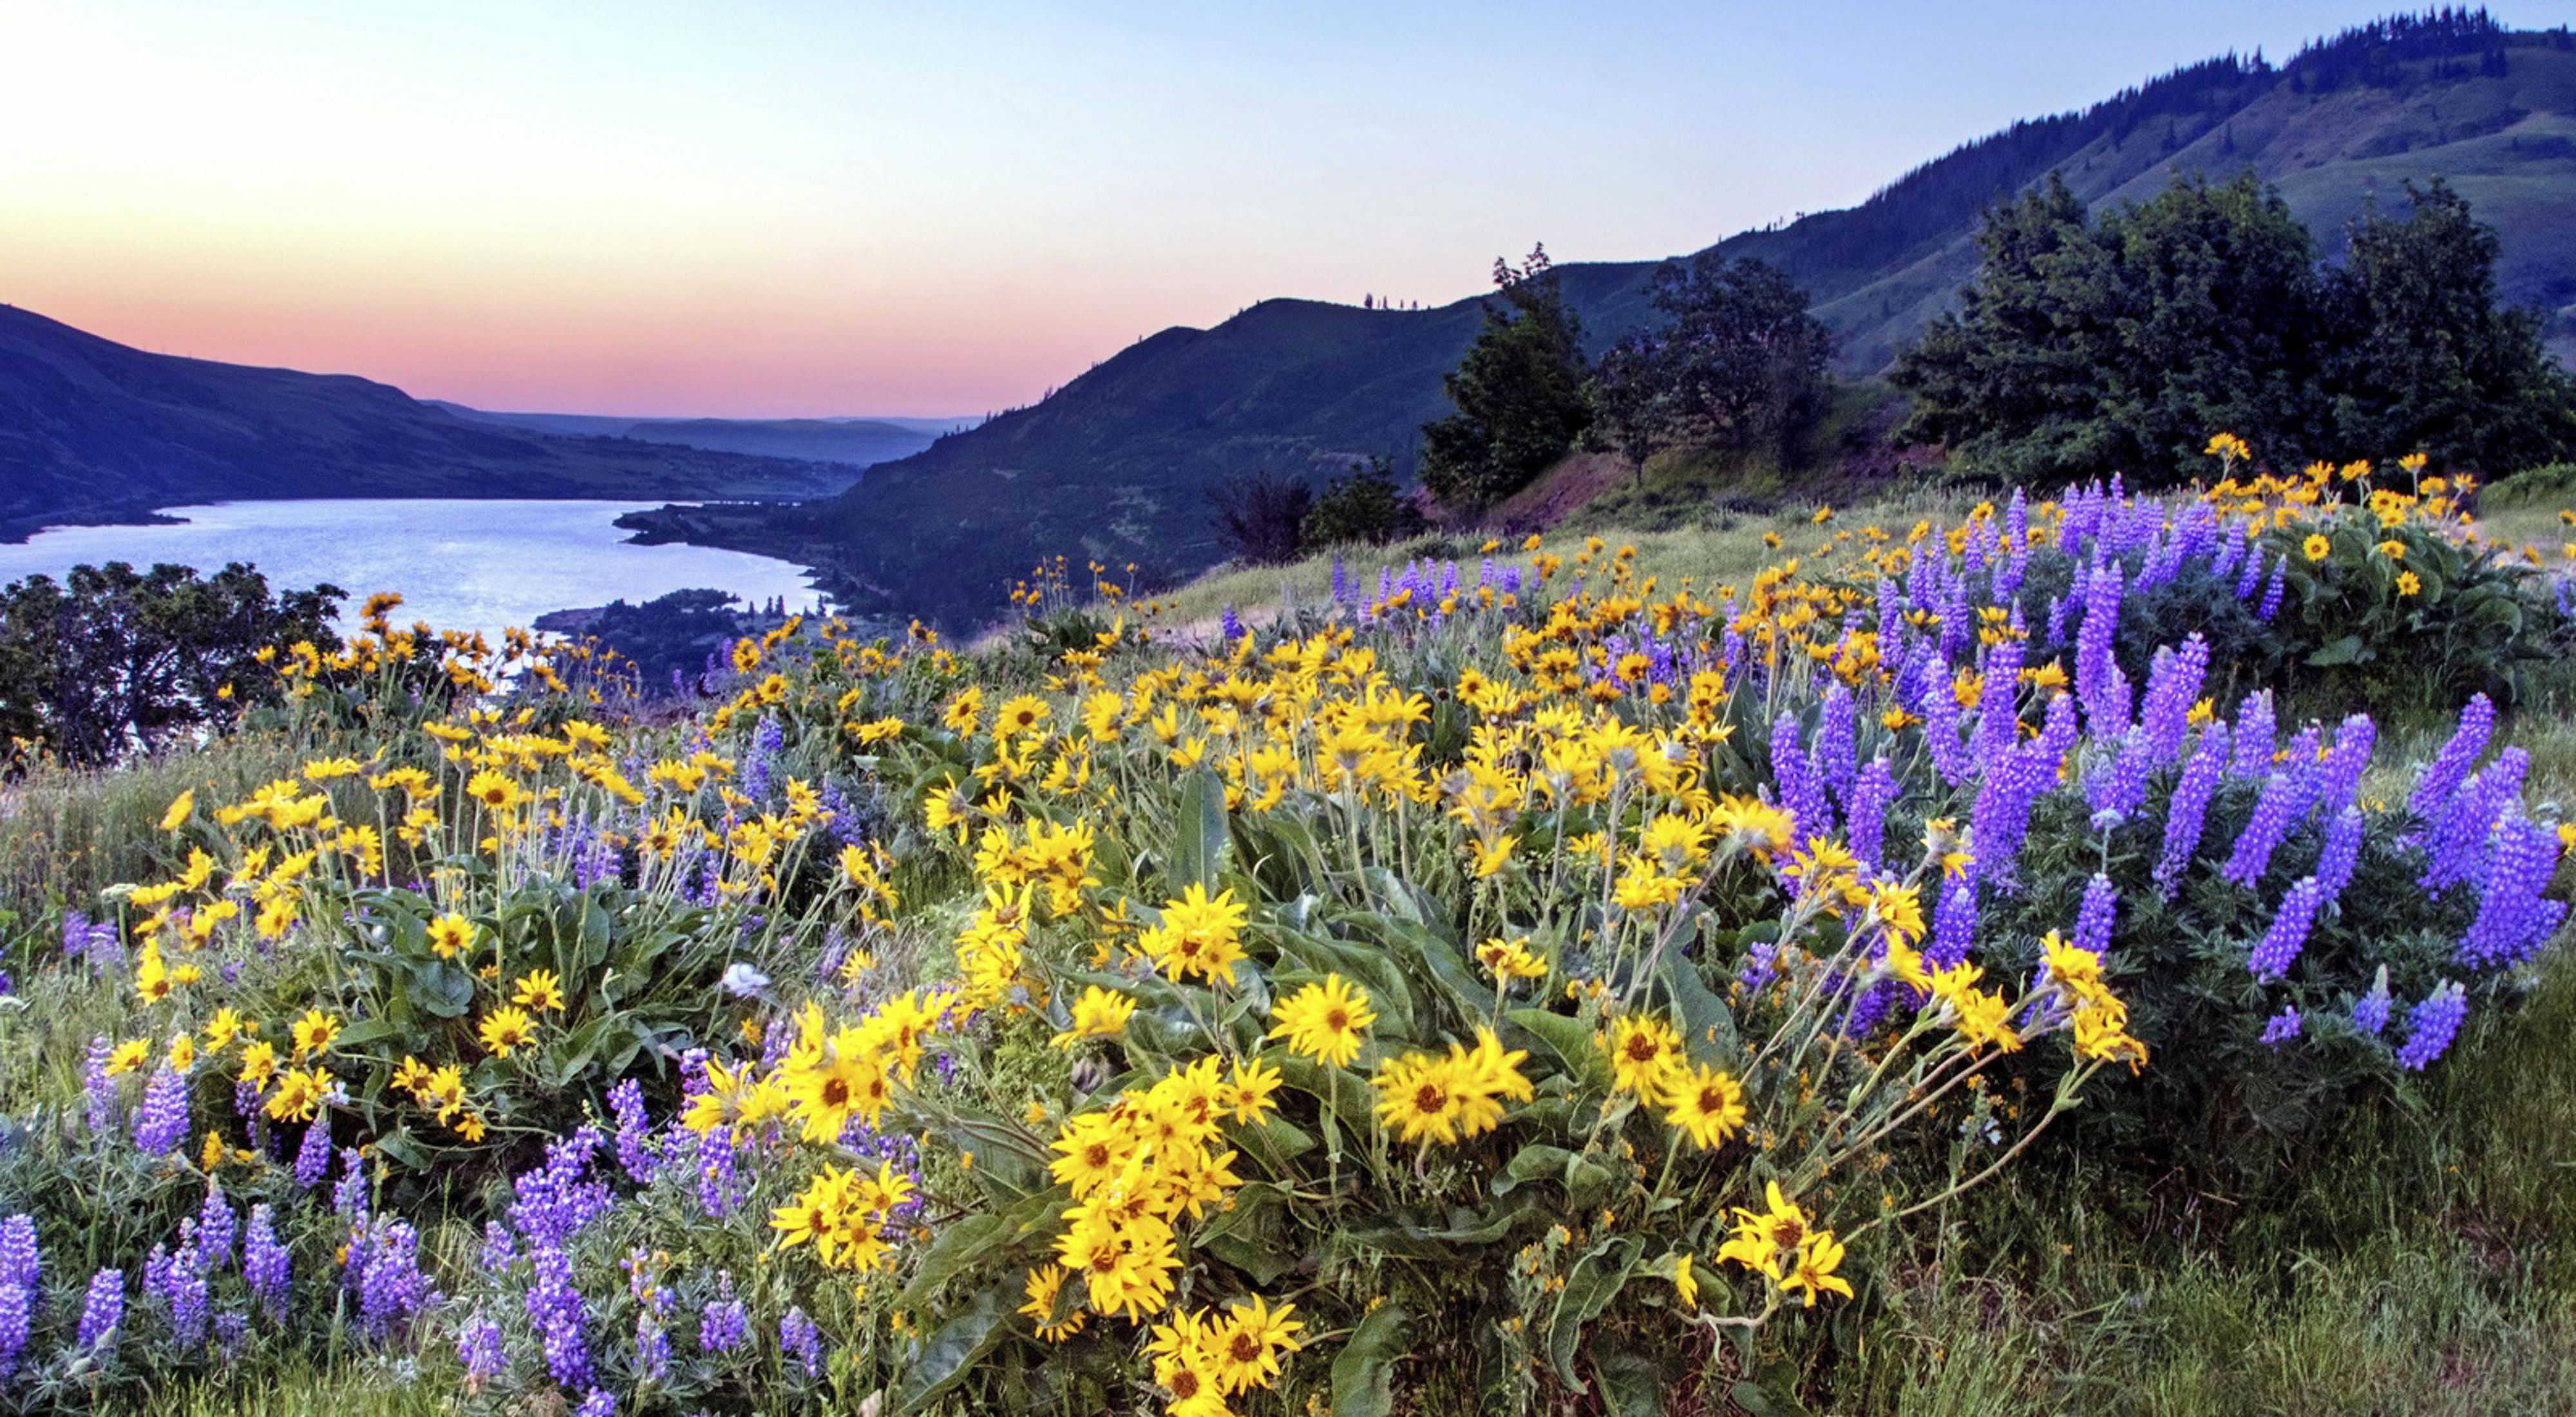 The Nature Conservancy in Oregon